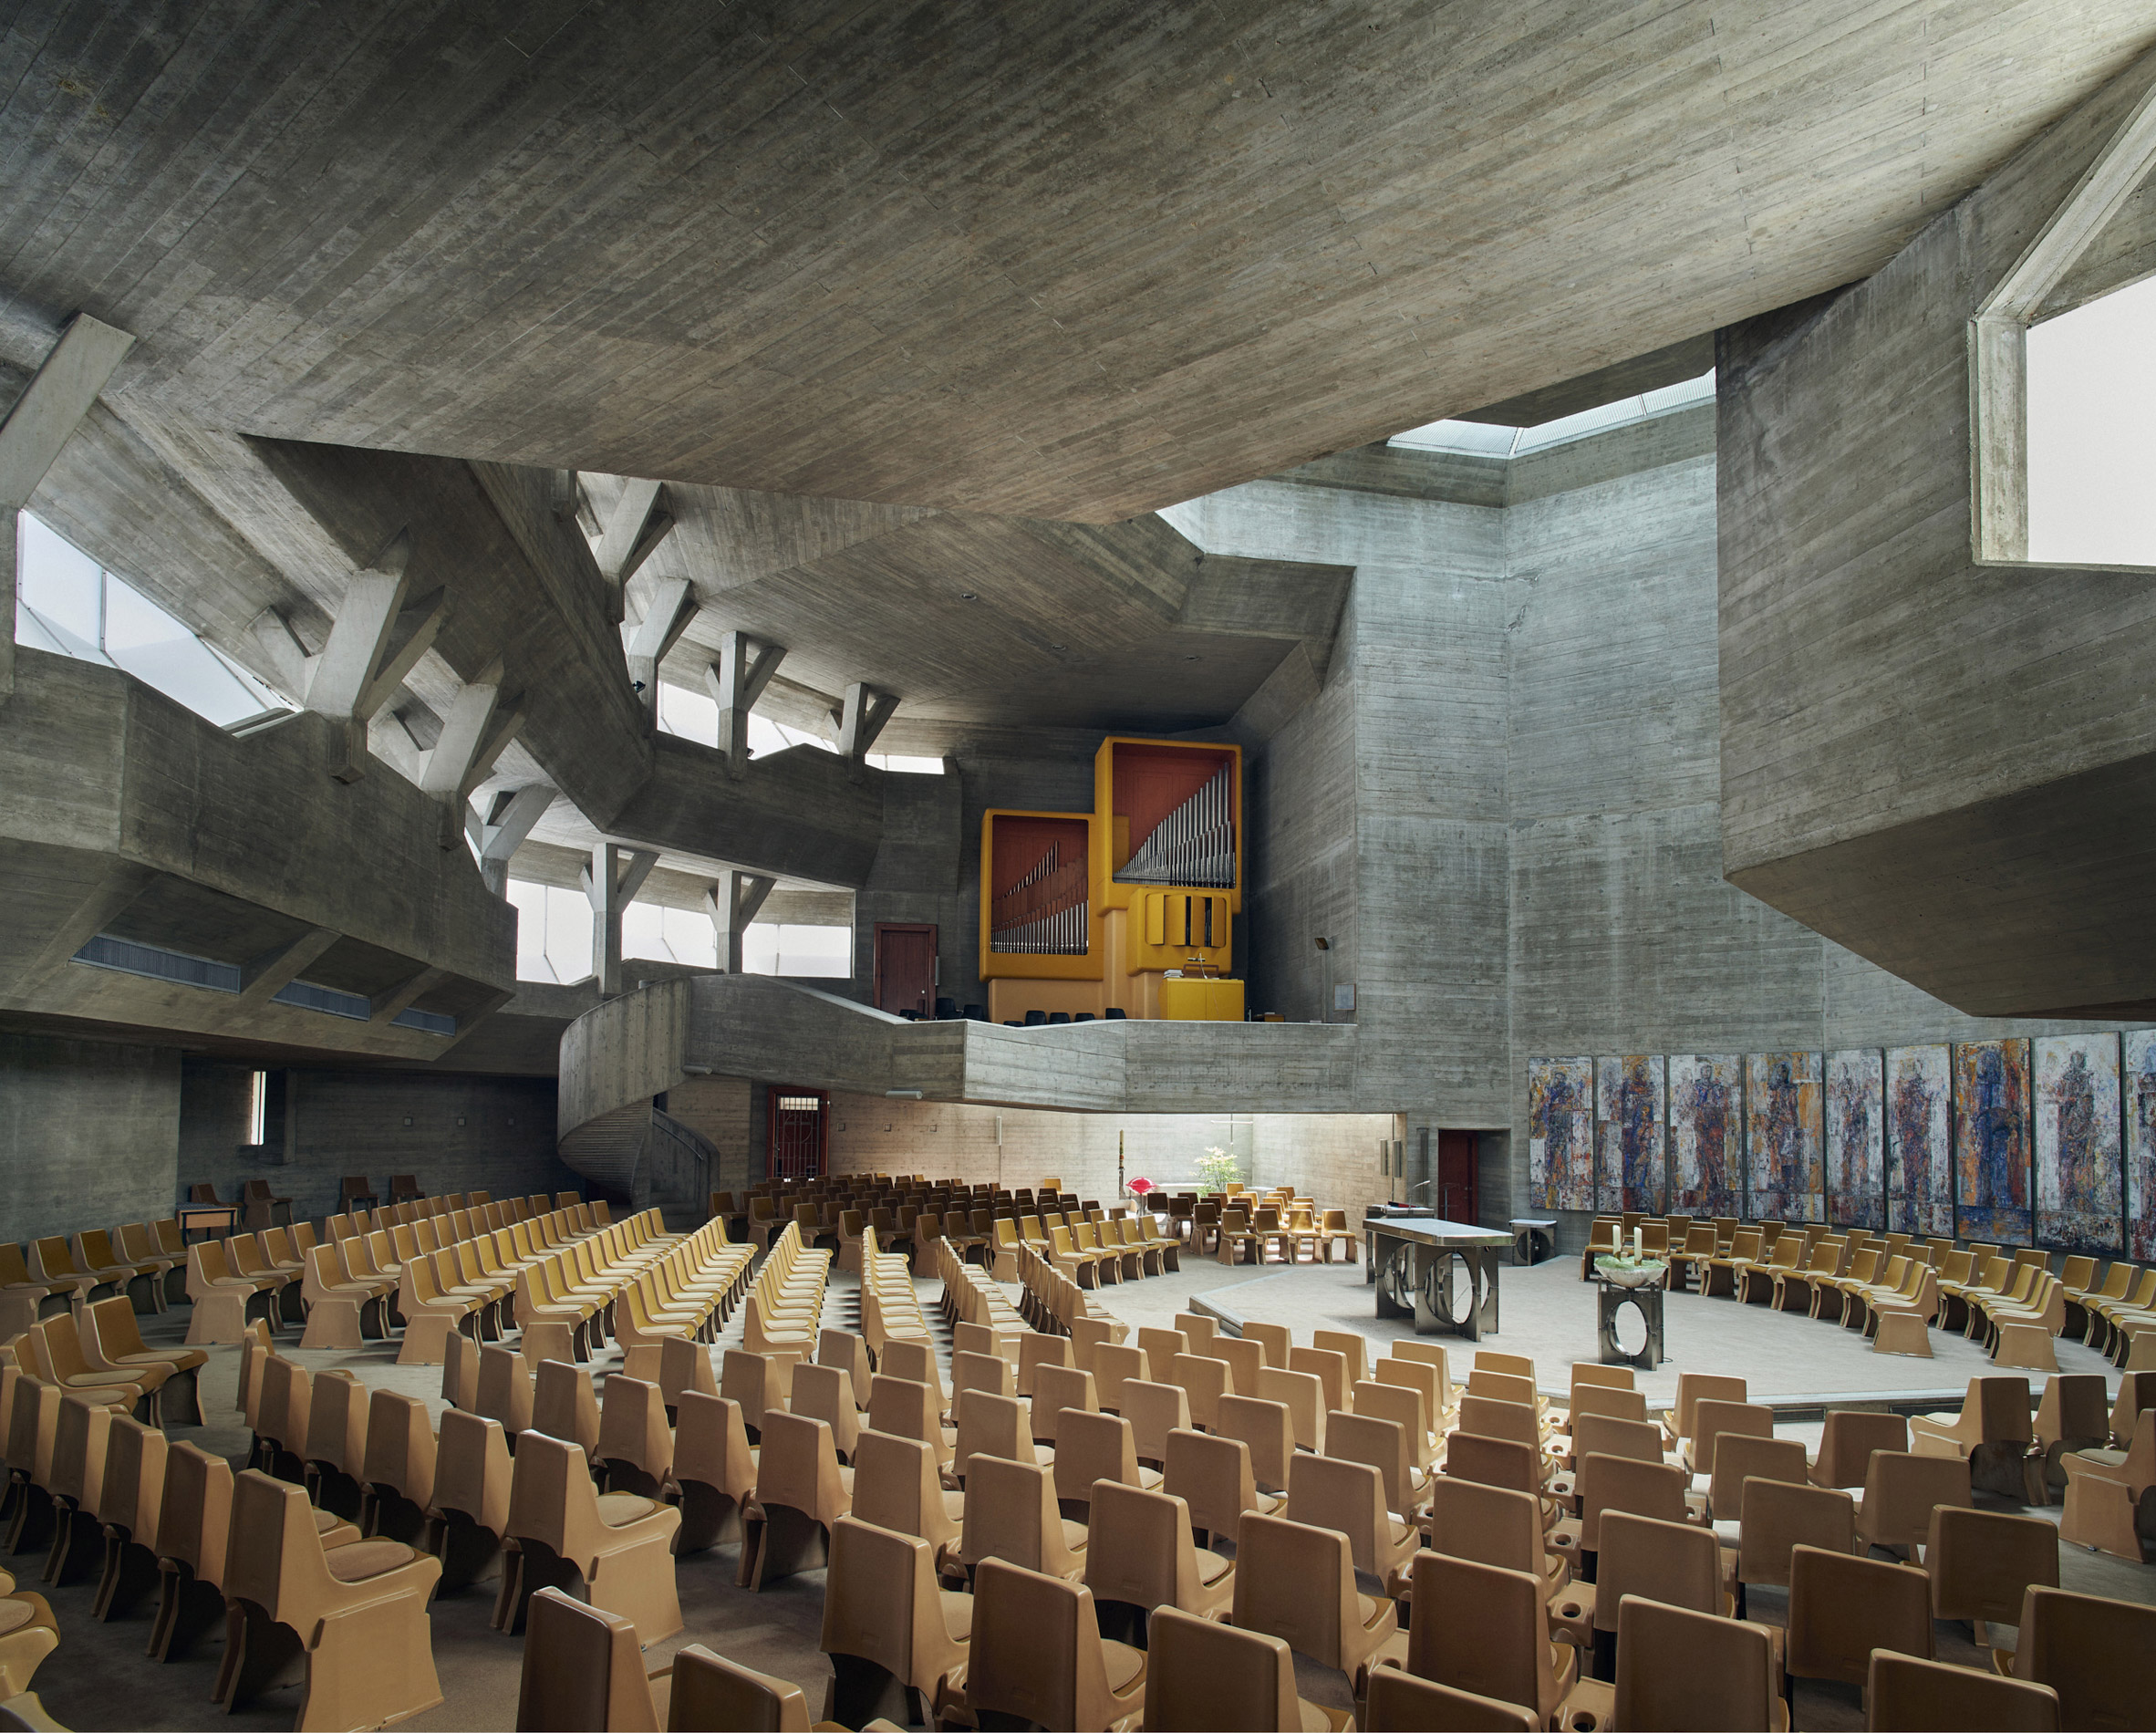 Osterkirche church featured in the Sacred Modernity book